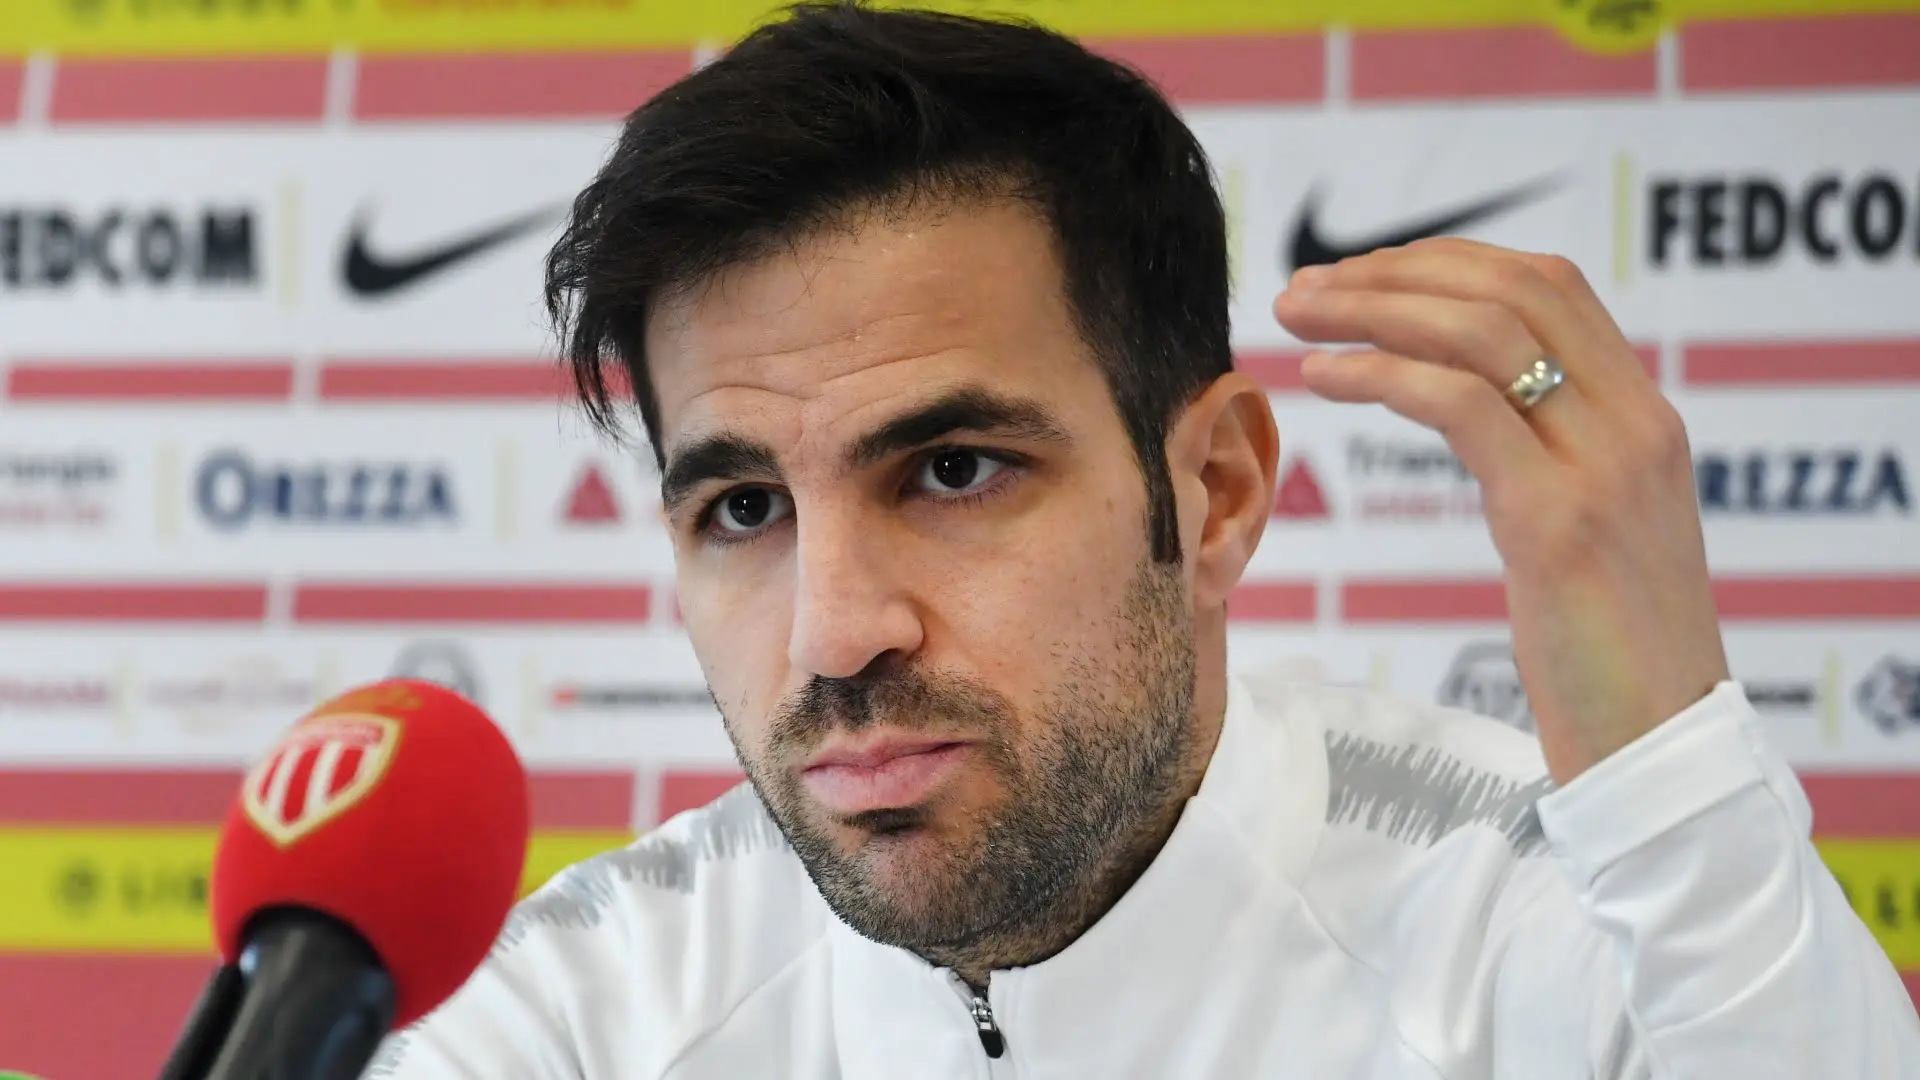 EPL: Fabregas fires title warning to Arsenal ahead of Liverpool clash